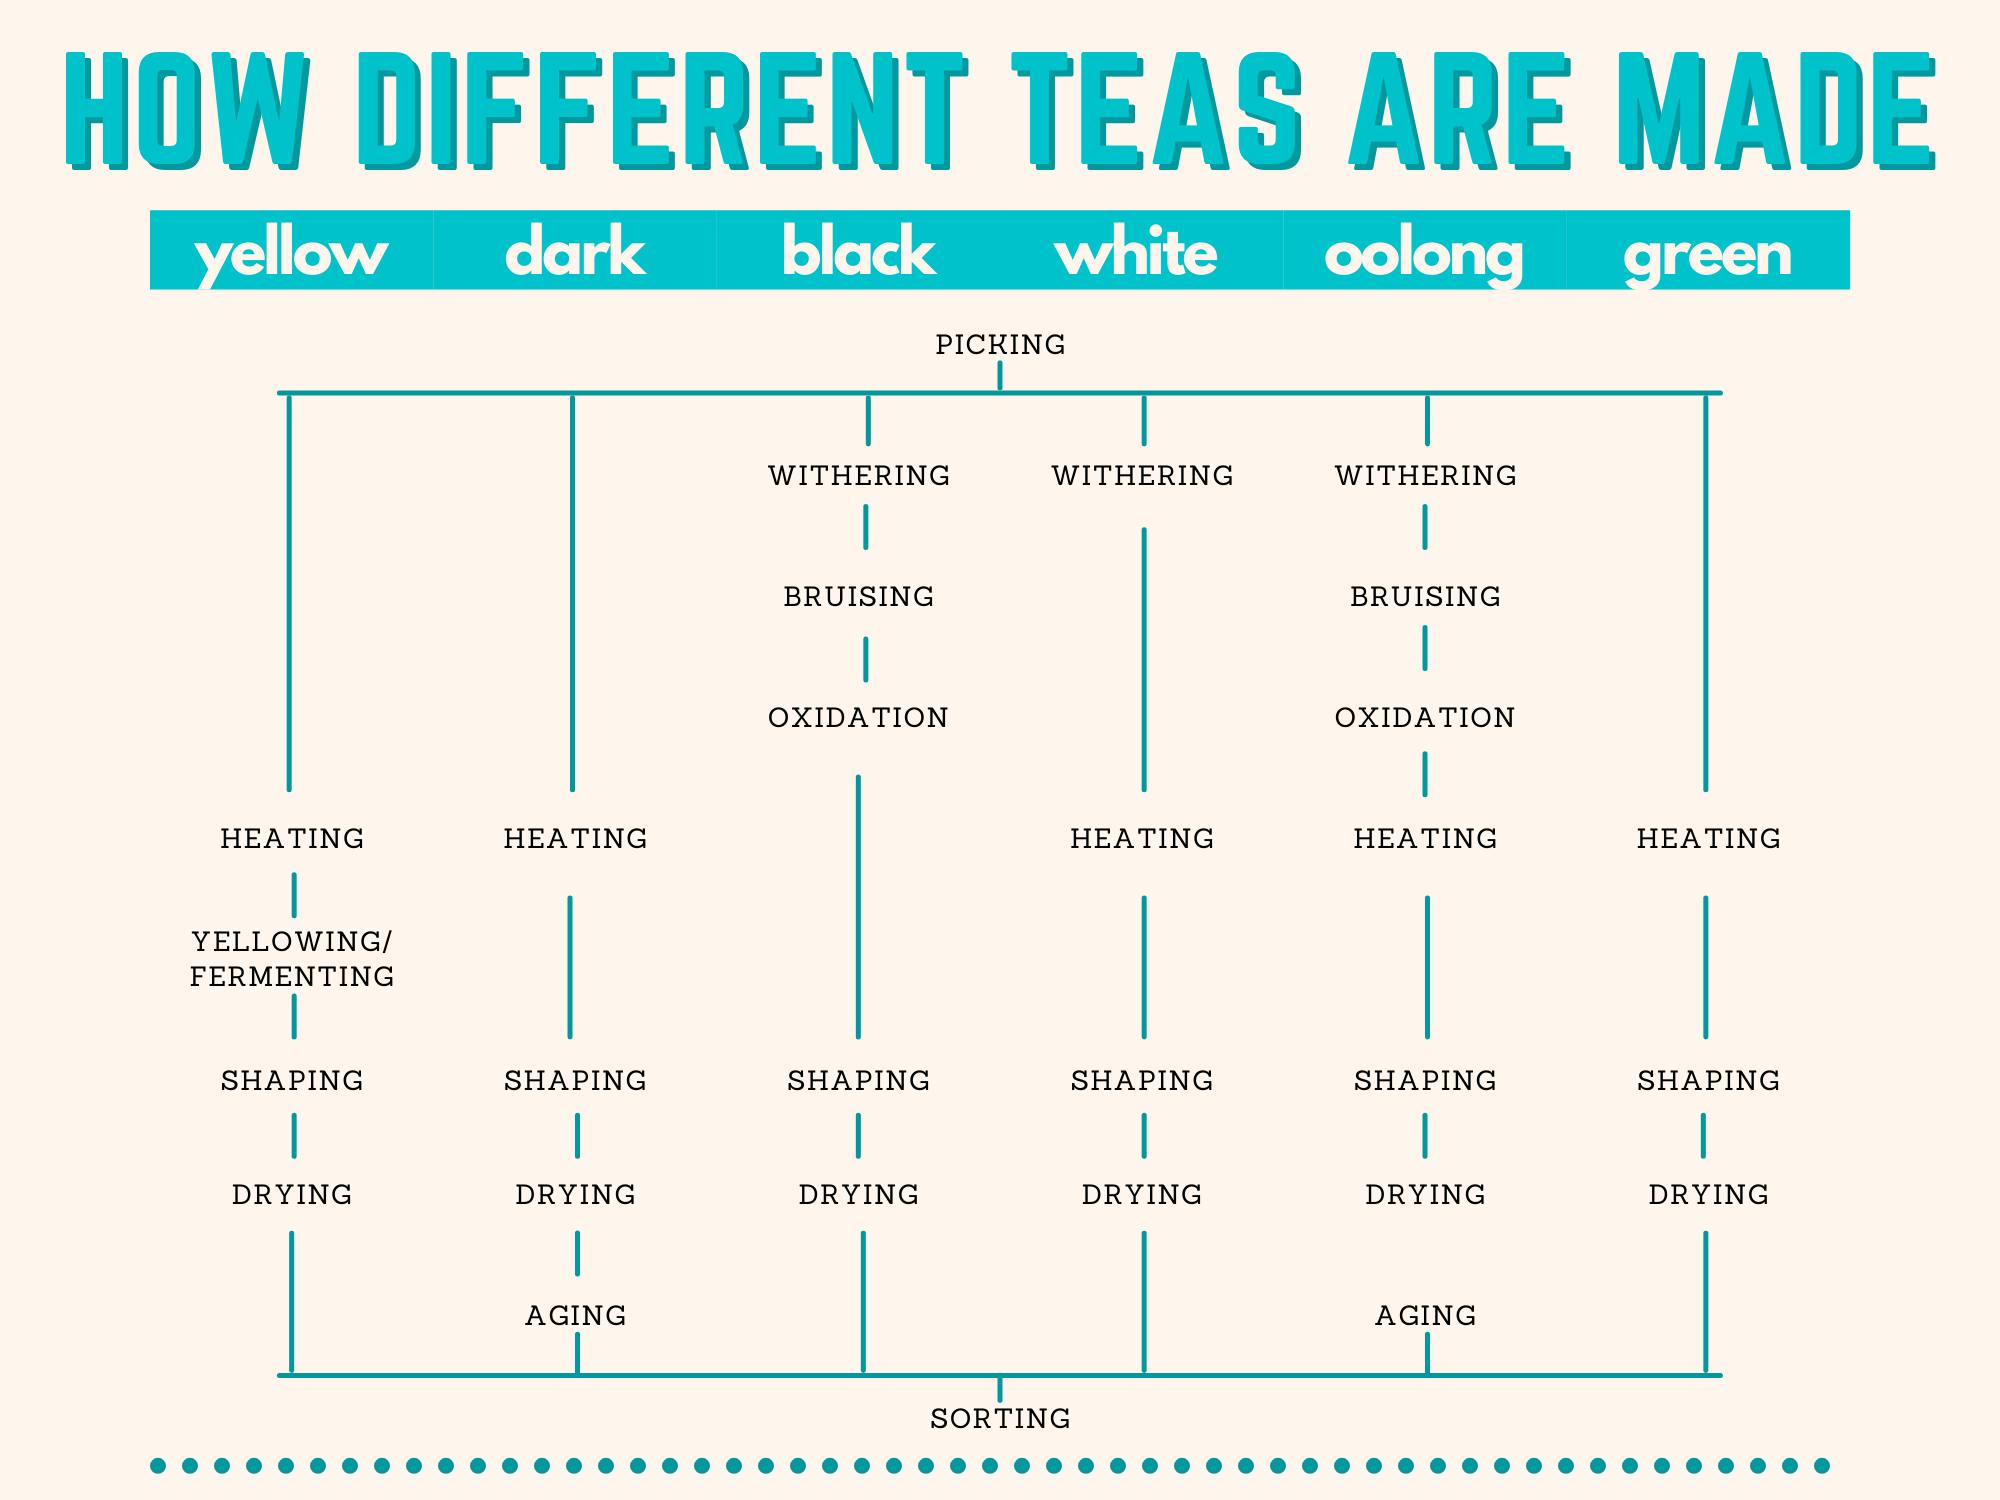 An infographic showing the process of how different kinds of teas are made